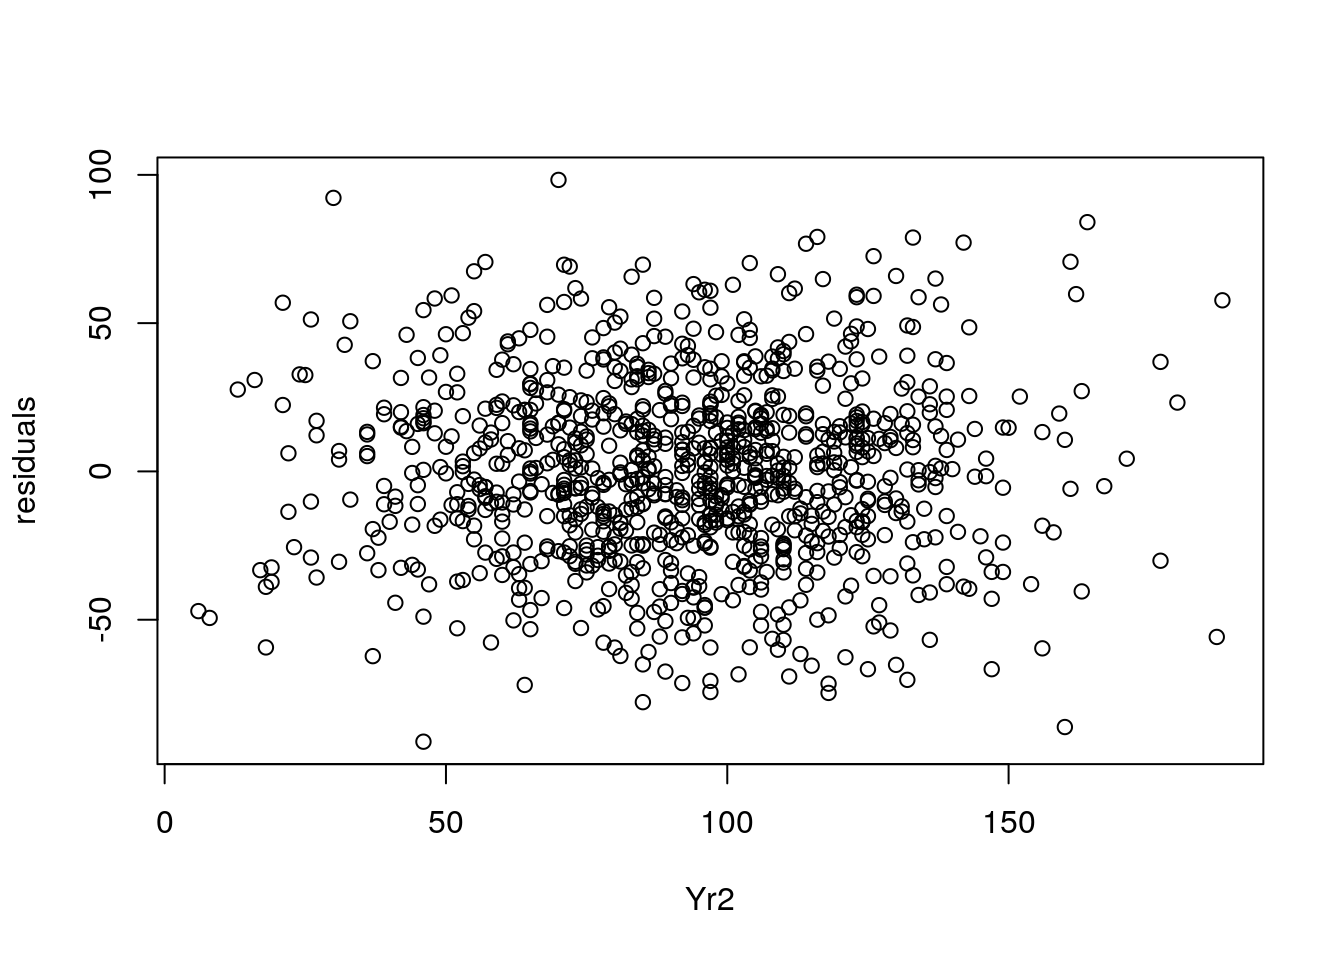 Plot of residuals against `Yr2` values